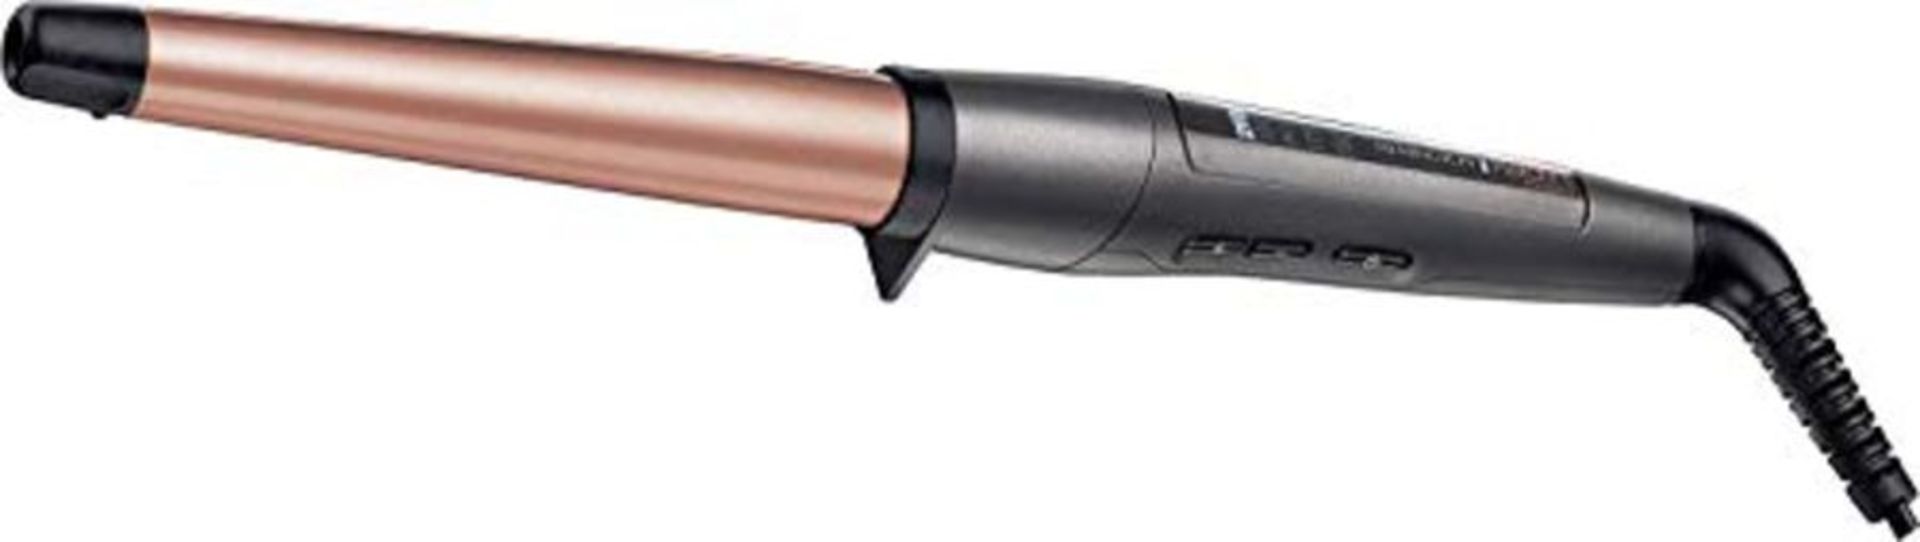 Remington Keratin Protect Hair Curling Wand, Infused with Keratin and Almond Oil for H